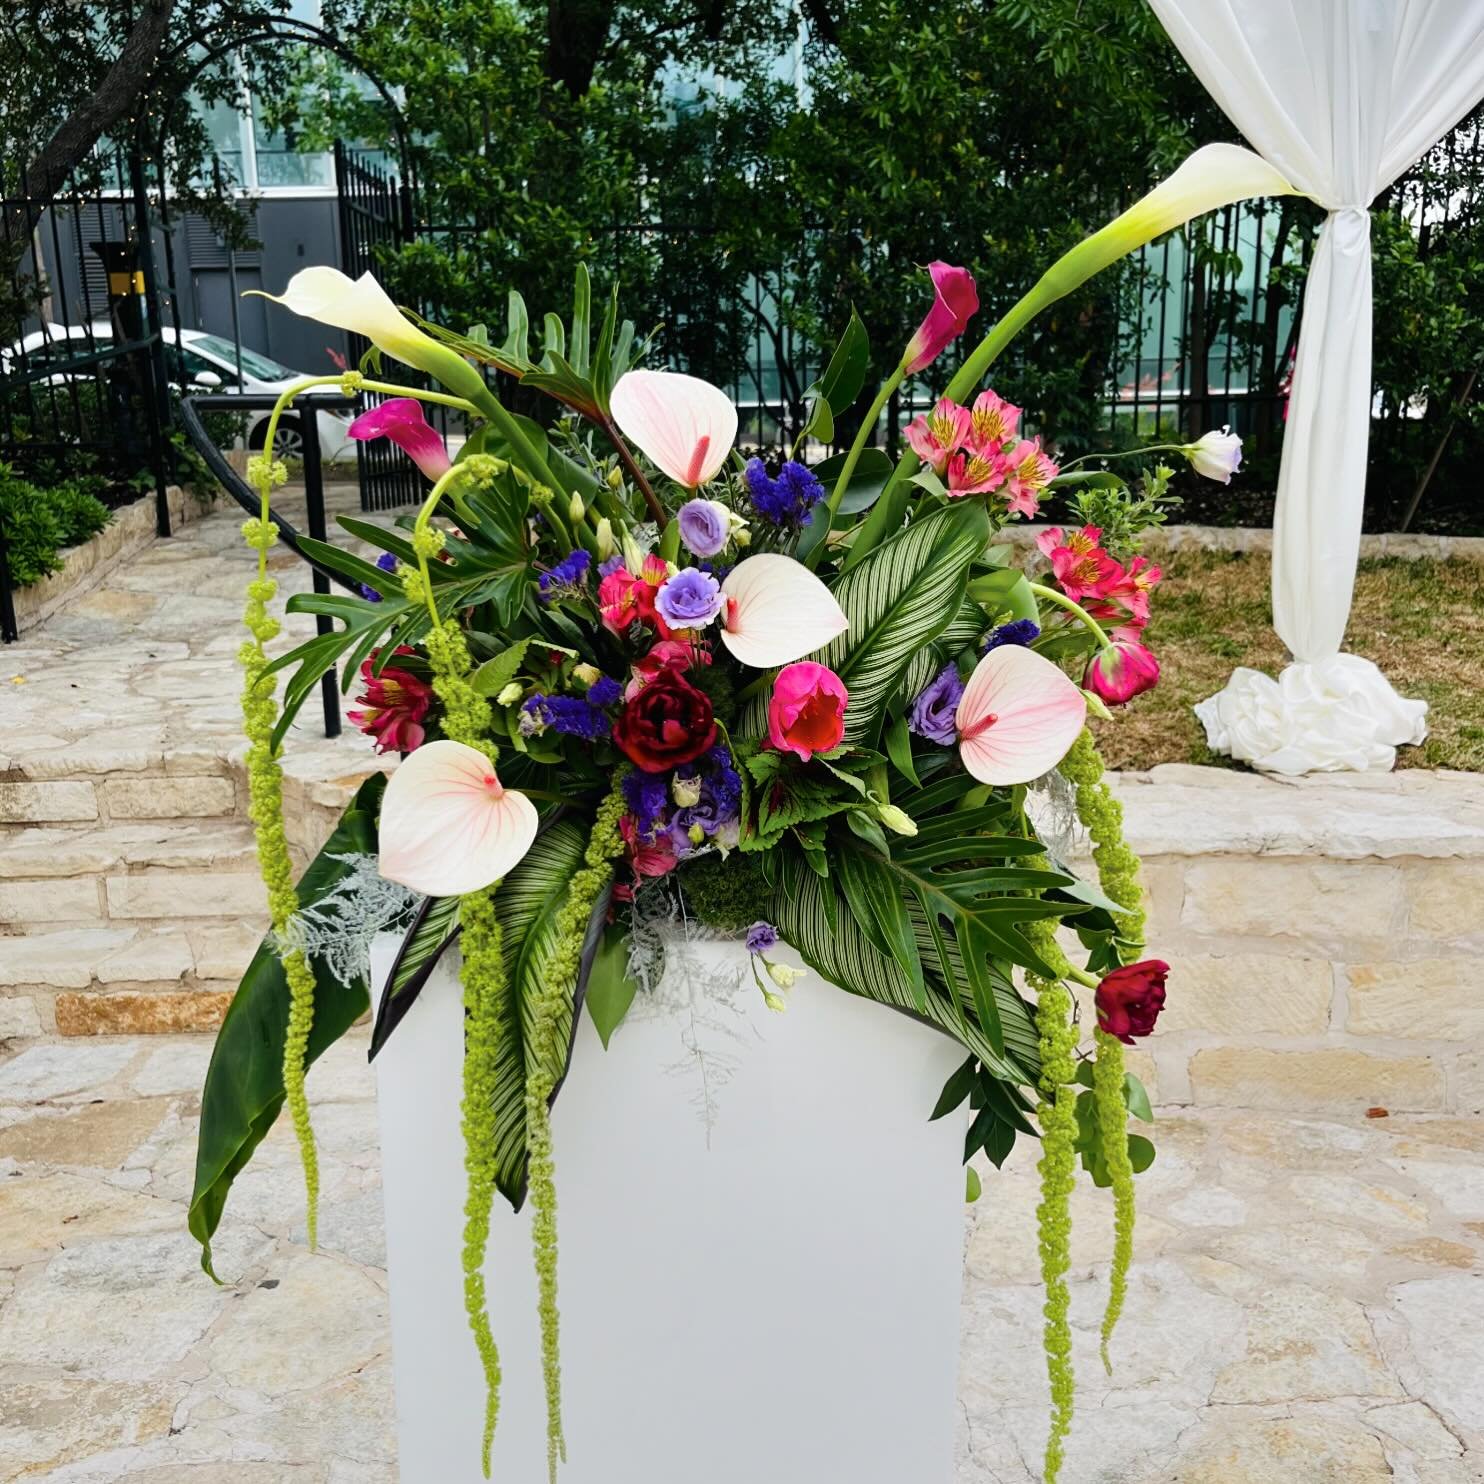 Congratulations to Jenna &amp; Leo on their marriage yesterday at the Allan House in Austin, TX. The day was full of color, laughter, good food and company! 

Couple @jenna.belvedere &amp; @likethelion_ 
Cake @lovergirlbakery 
Catering @peachedtortil